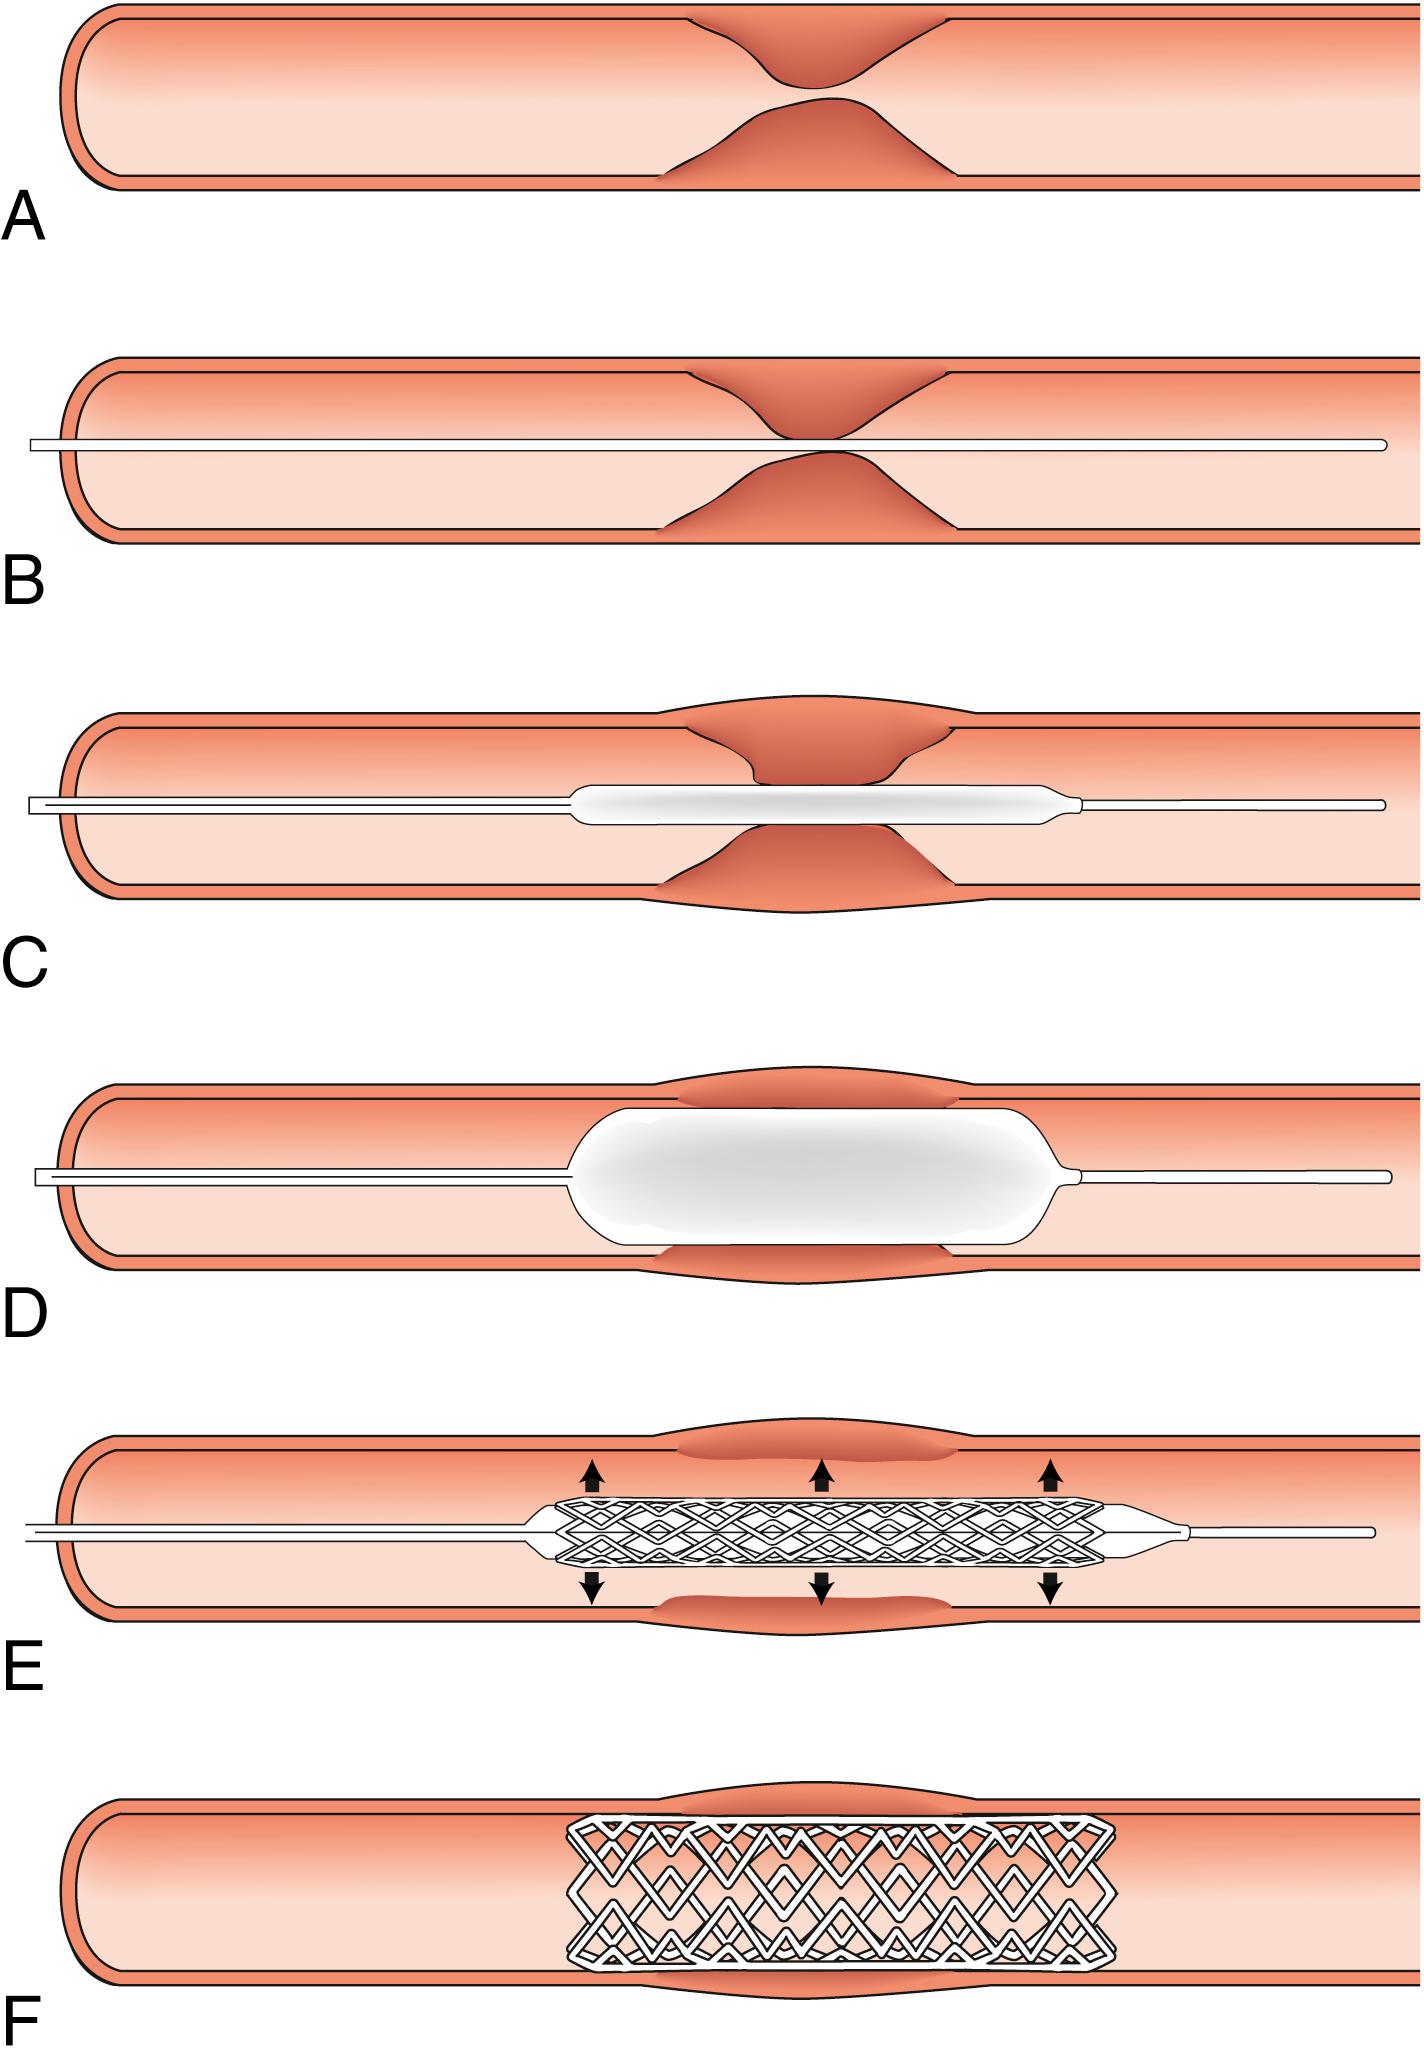 Fig. 22.8, Balloon angioplasty and stenting. (A) Critical arterial stenosis. (B) A guidewire is used to cross the lesion. (C) The guidewire is used to direct a balloon angioplasty catheter across the lesion. (D) The balloon is inflated. (E) A metal stent may be mounted on a catheter. The stent may be self-expanding or require expansion with a balloon. In many cases, the first manoeuvre is to cross the lesion with a stent, and in this circumstance, steps C and D may be omitted. (F) Metal stent holding open the stenosis.